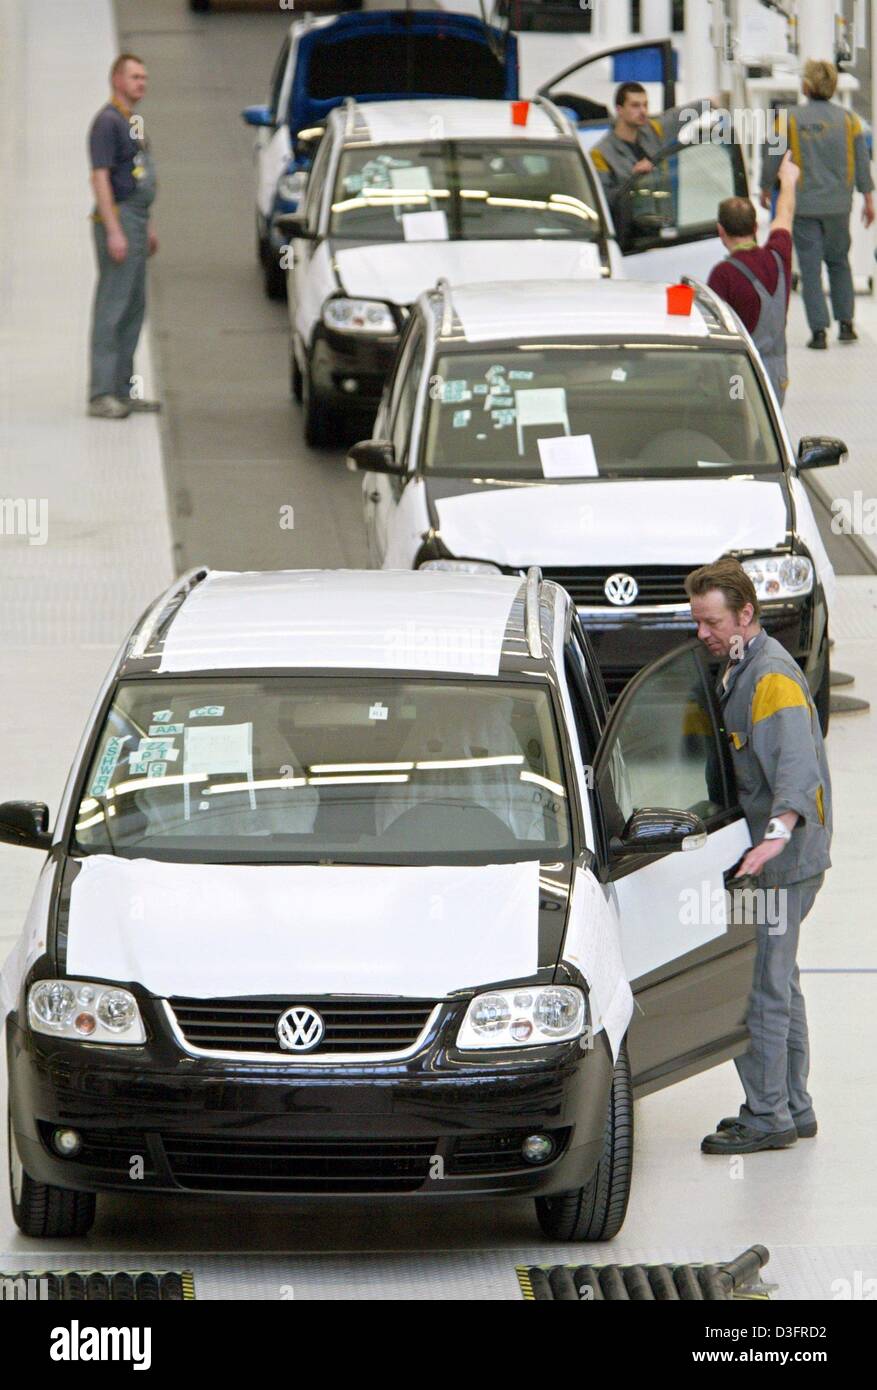 (dpa) - A Volkswagen employee is doing the final check on the new model VW Touran in Wolfsburg, Germany, 26 March 2003. The Touran is a compact van based on the model of the VW Golf and has been offered since March for less than 20,000 euros. Volkswagen plans to sell 130,000 Tourans in 2003 and 180,000 in 2004. The workers are wearing boilersuits with the 'Auto 5000' logo - they we Stock Photo